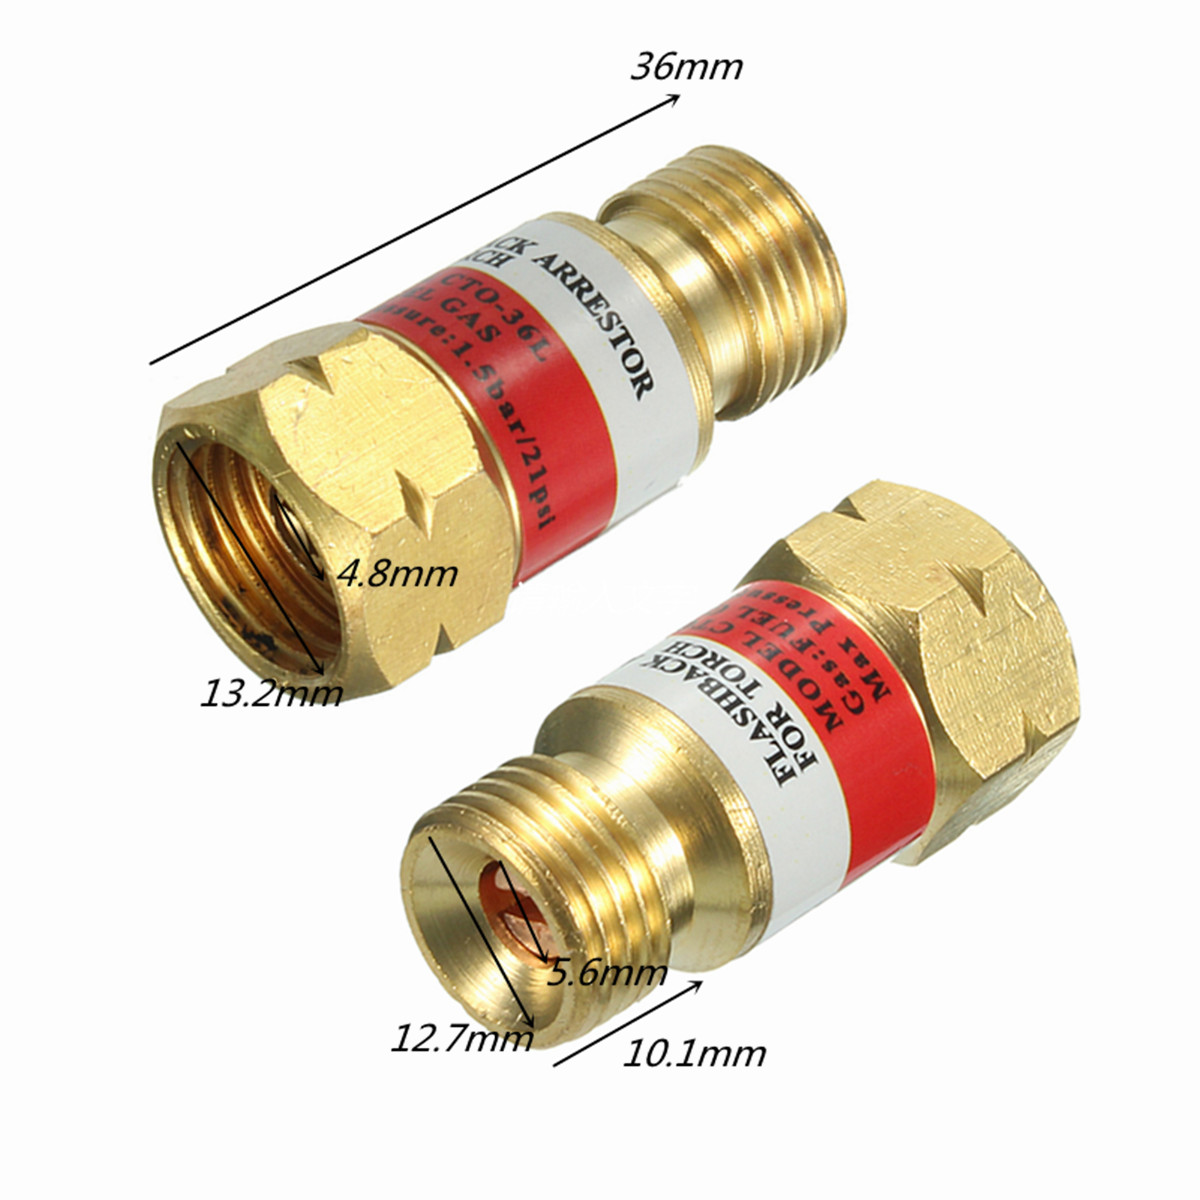 Acetylene-Check-Valve-Set-For-Torch-End-Welding-Torch-Cutting-1308851-5